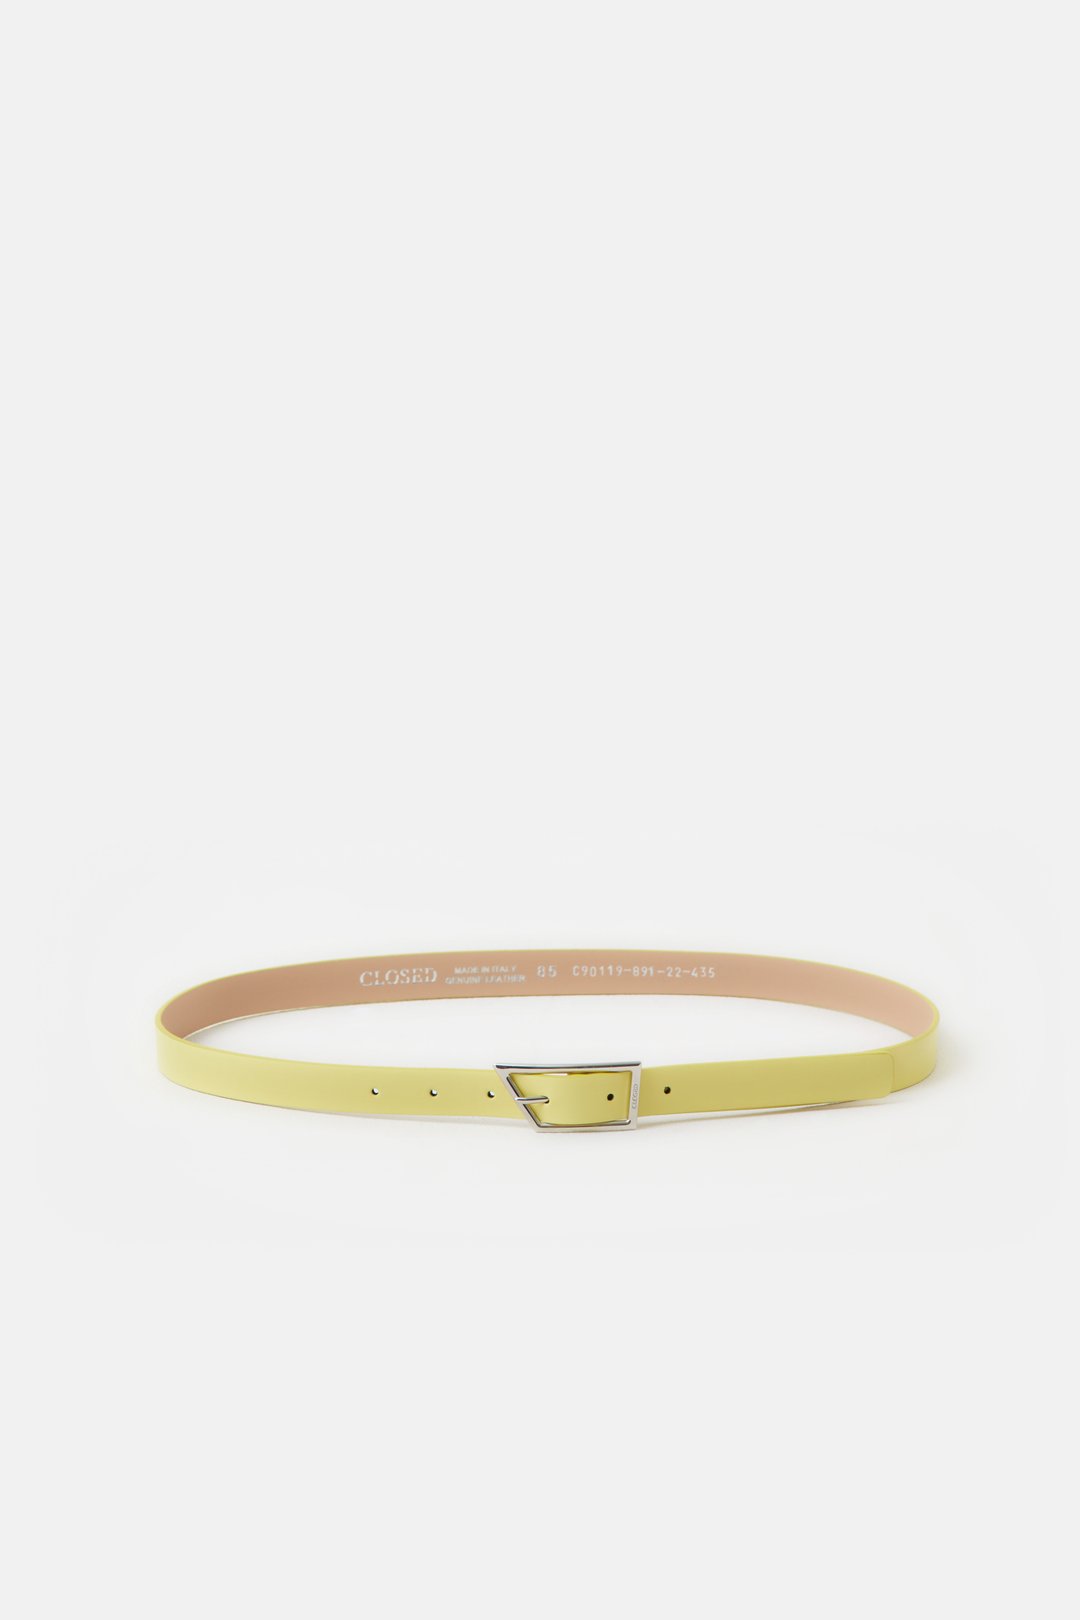 CLOSED WOMENS SOFT LEATHER BELT - PRIMARY YELLOW